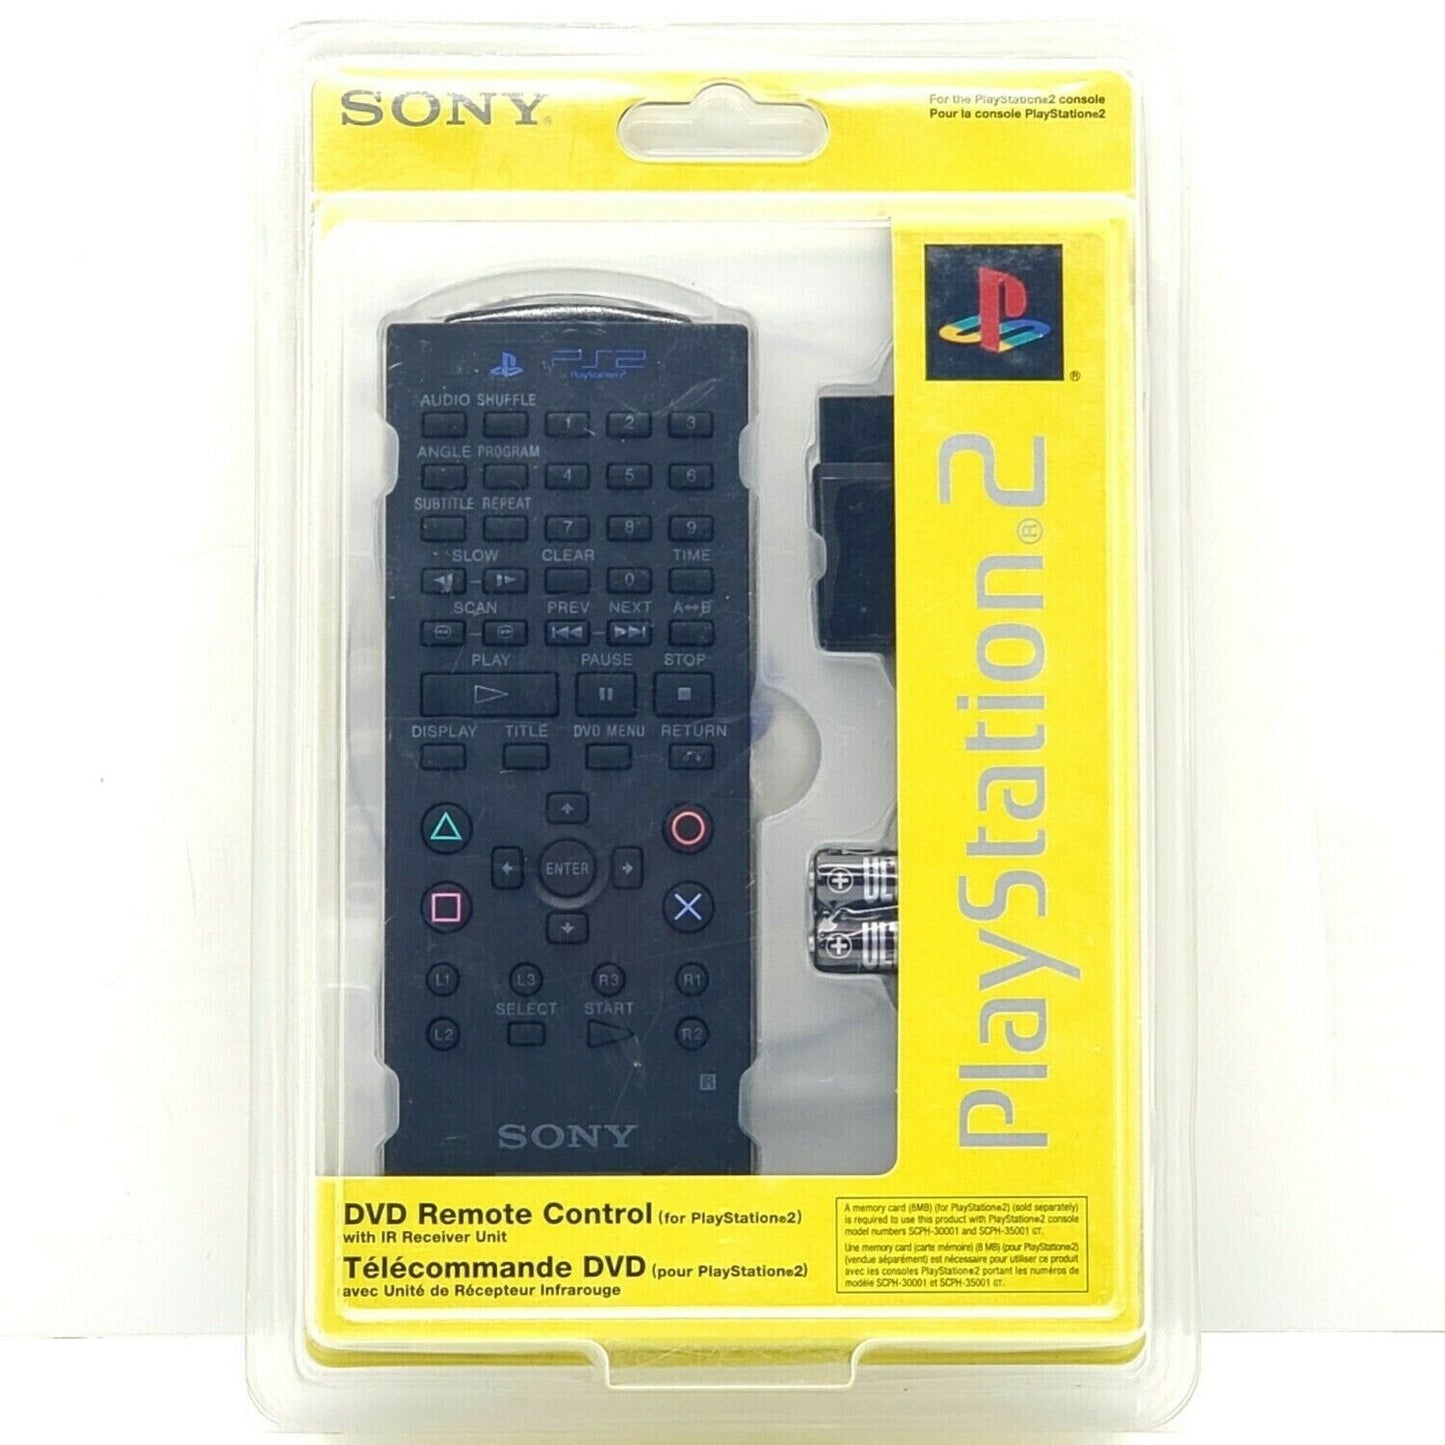 SONY PlayStation 2 PS2 DVD Remote Control - BRAND NEW from 2P Gaming